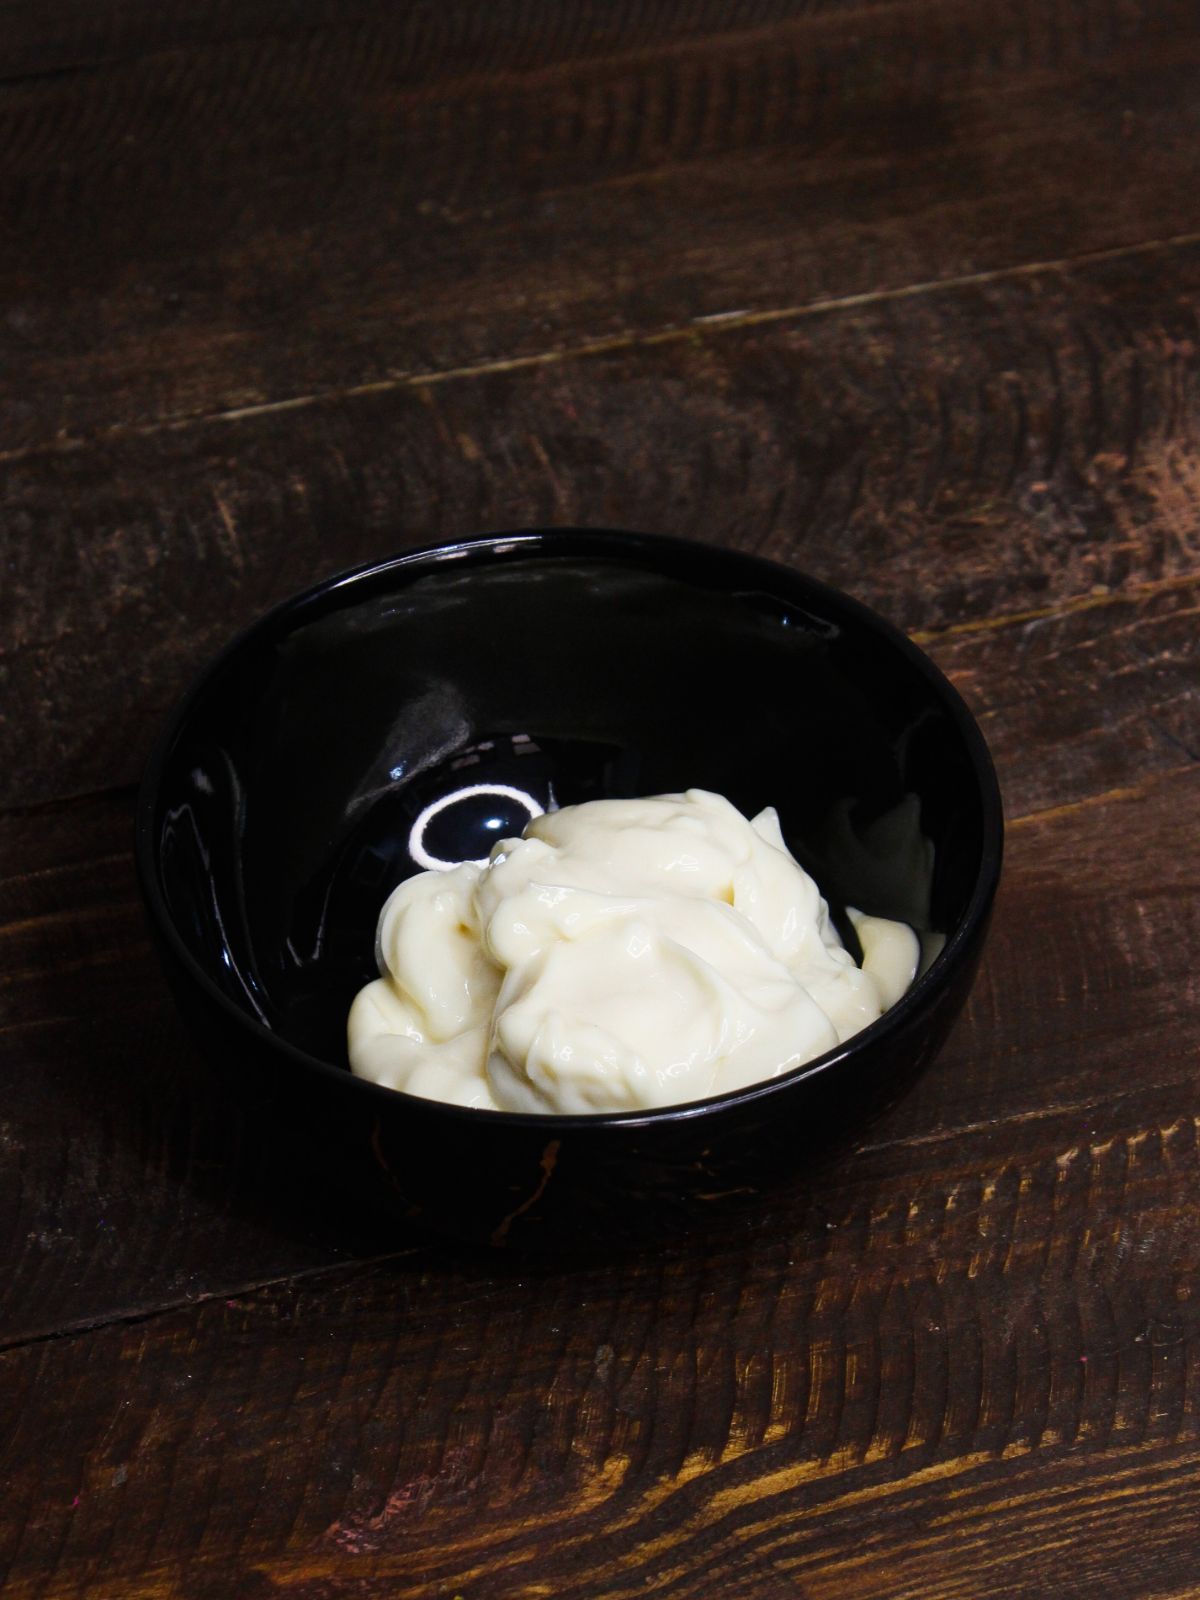 Take Mayonnaise in a small bowl